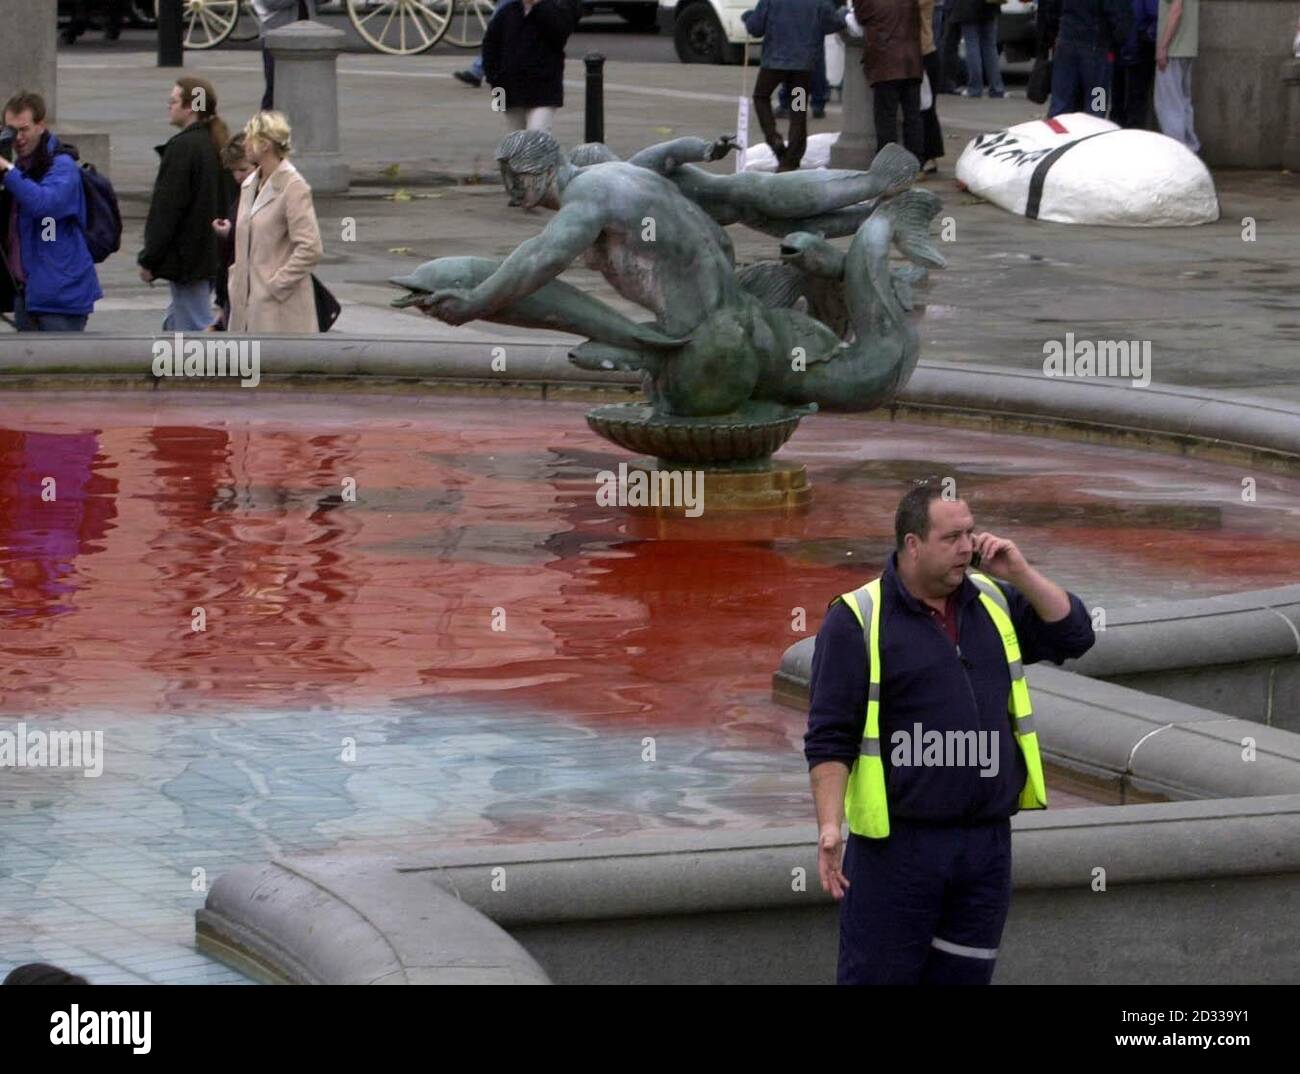 Red dye thrown in by demonstrators colours the water of a fountain in London's Trafalgar Square, during a protest over the State Visit by US President George W Bush. The President arrived in the UK Tuesday evening and was formally welcomed to the country Wednesday morning by The Queen.   Stock Photo